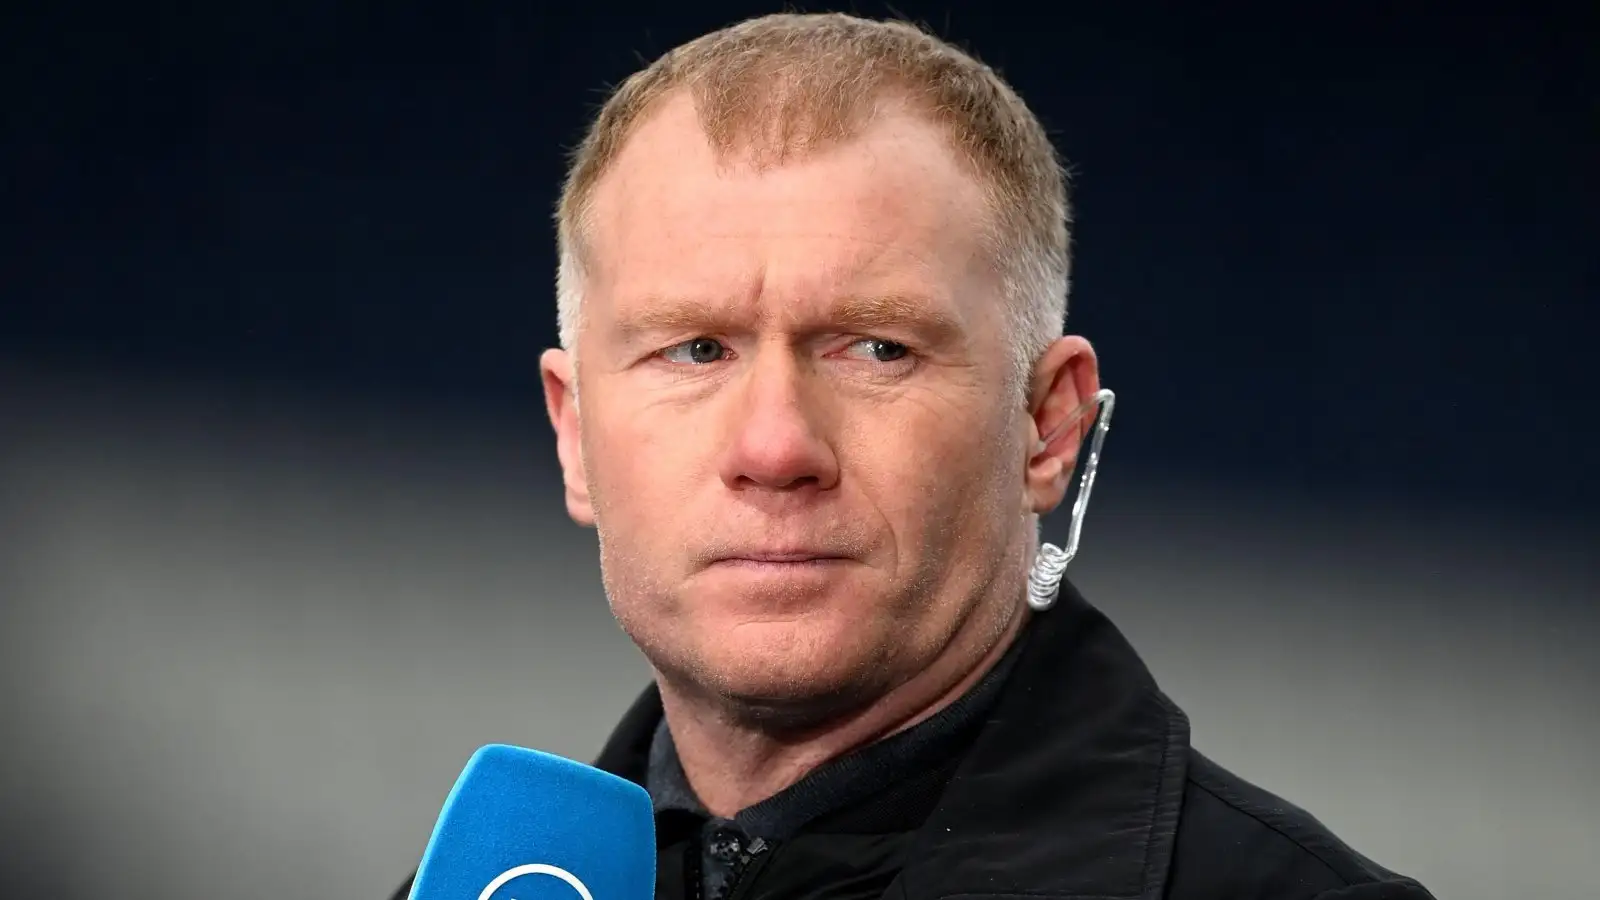 Scholes, Hargreaves disagree over who they want Man Utd to face in Europa League play-off tie